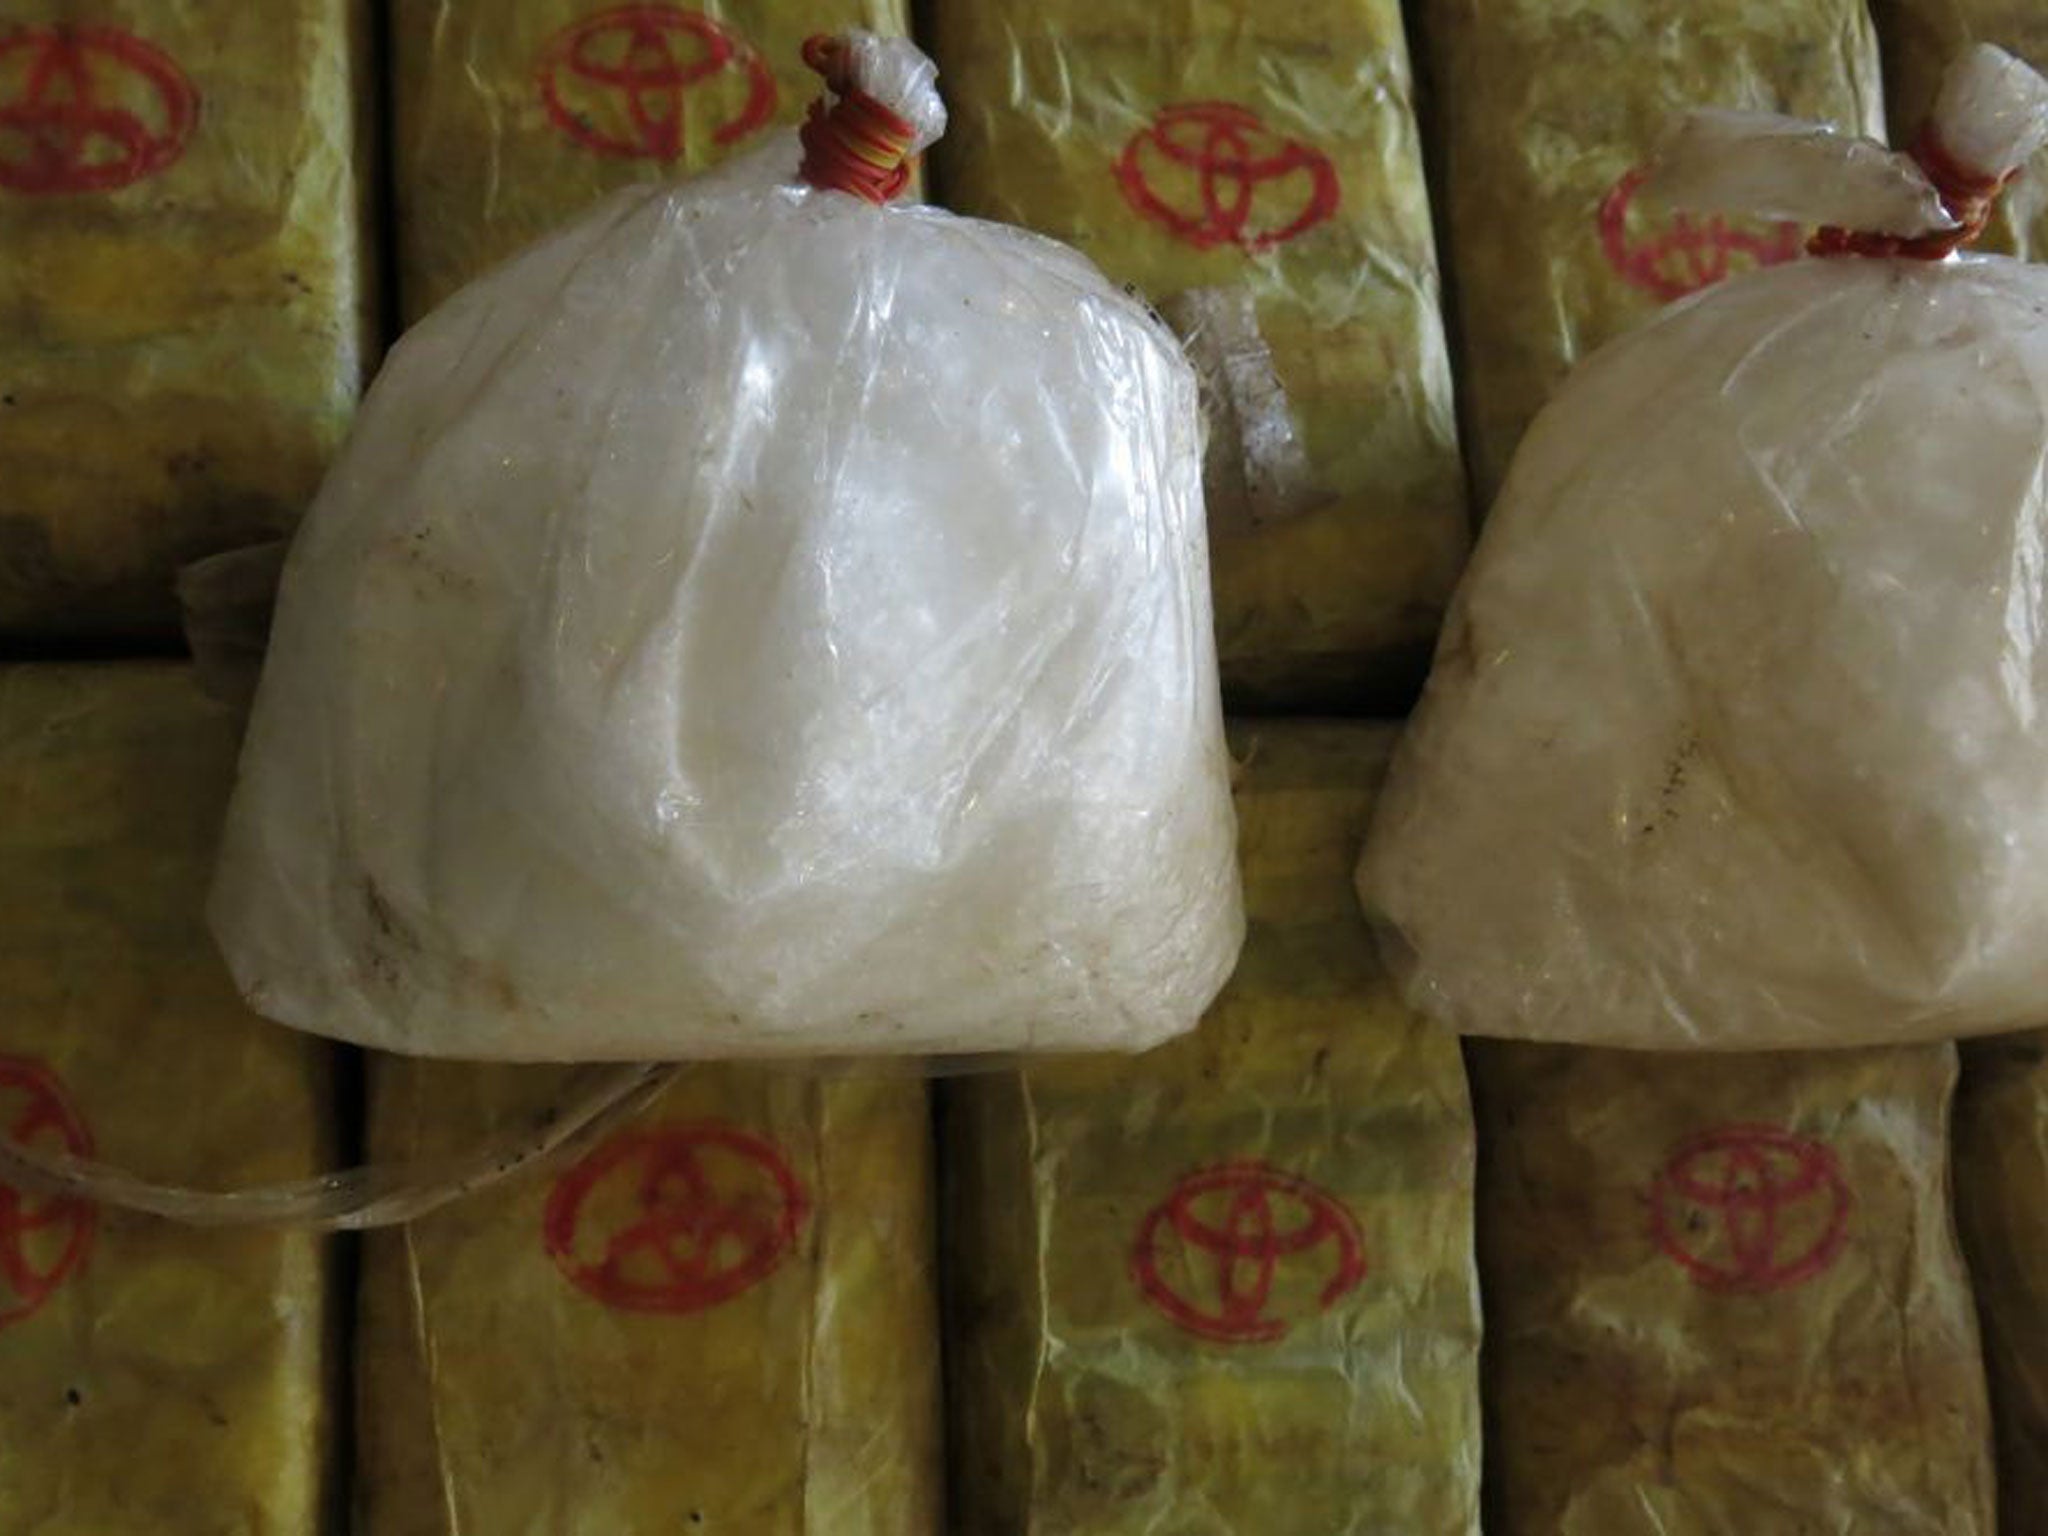 File photo showing two bags of crystal meth and packets of methamphetamine pills trafficked from Myanmar